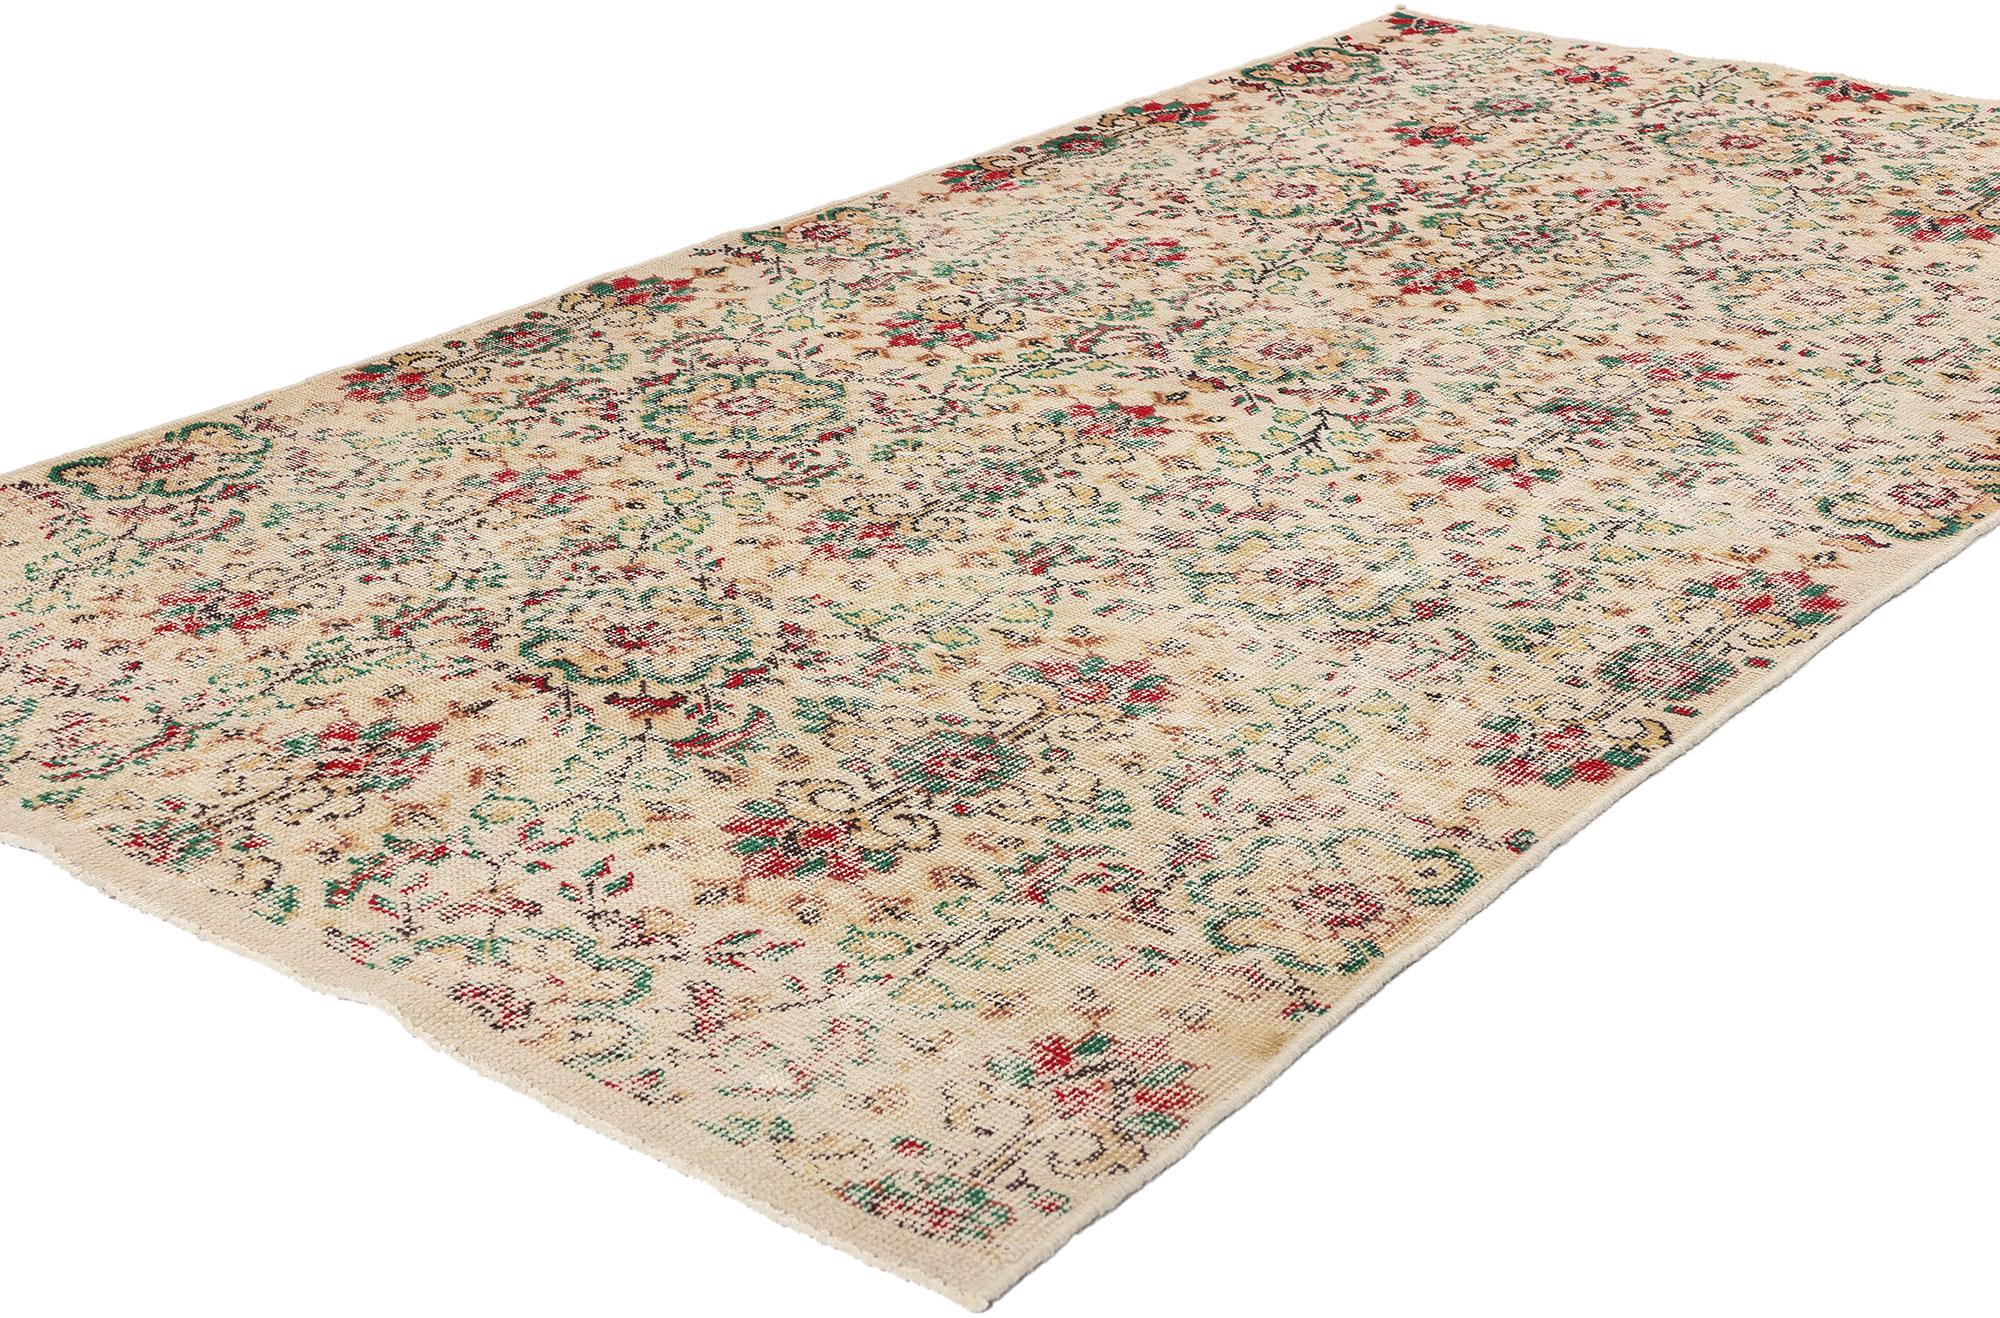 52011 Distressed Vintage Turkish Sivas Rug, 03'10 x 07'01. Distressed Turkish Sivas rugs, originating from Sivas in central Anatolia, Turkey, are steeped in tradition and authenticity. These rugs undergo intentional aging processes such as